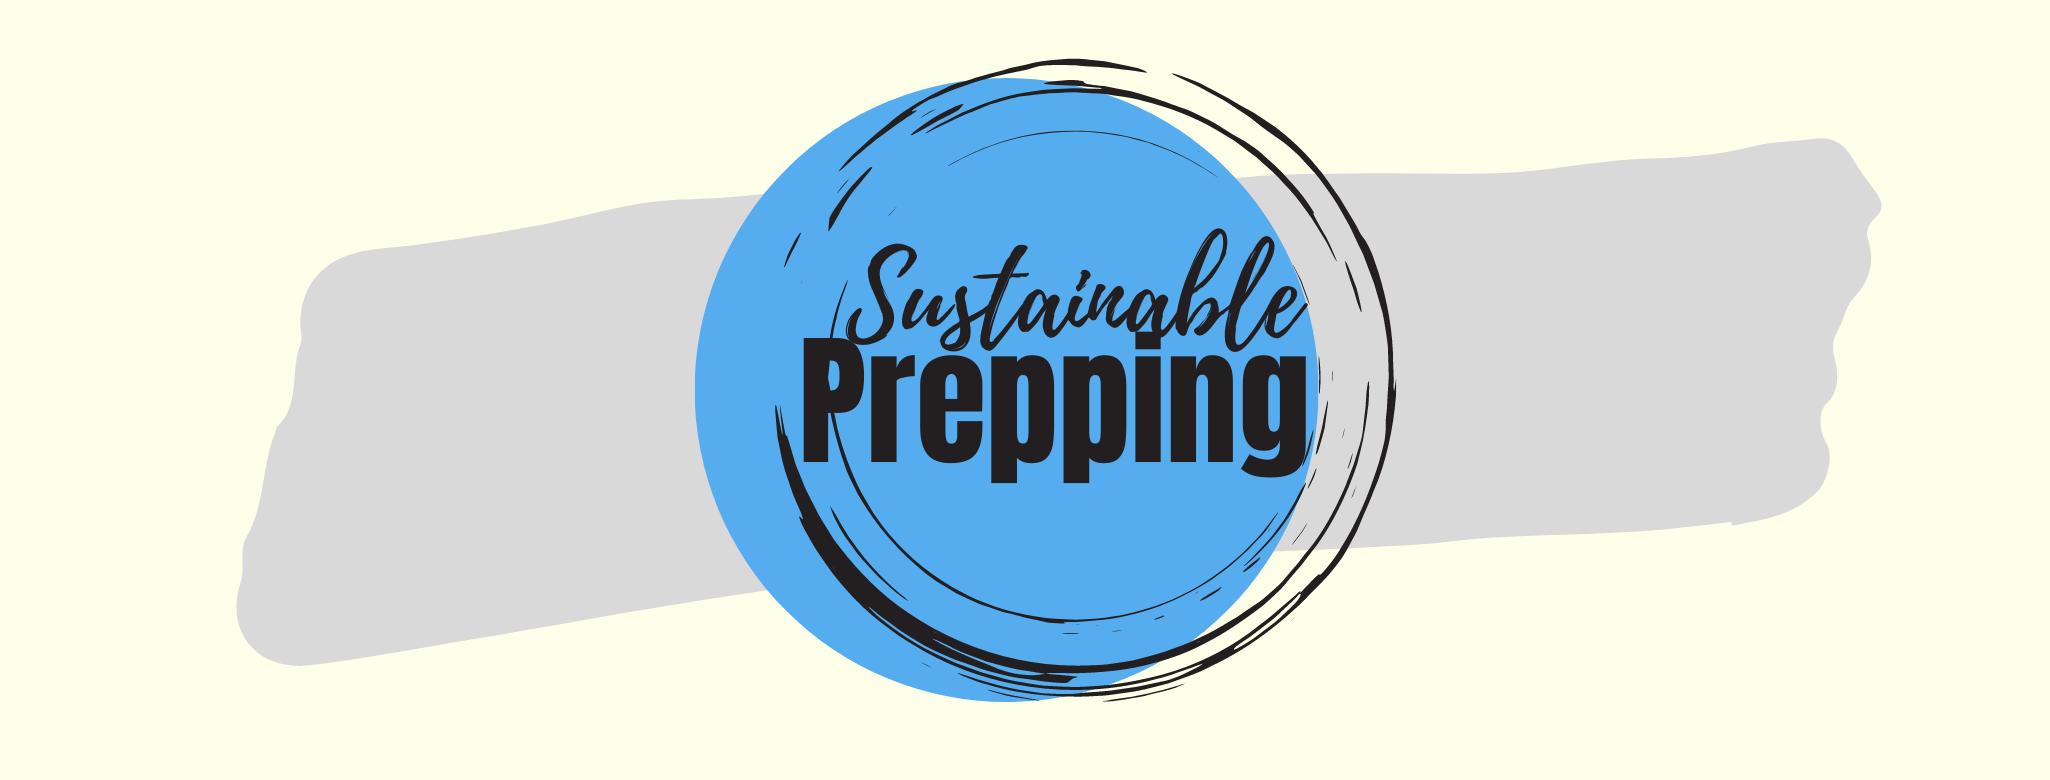 Sustainable Prepping